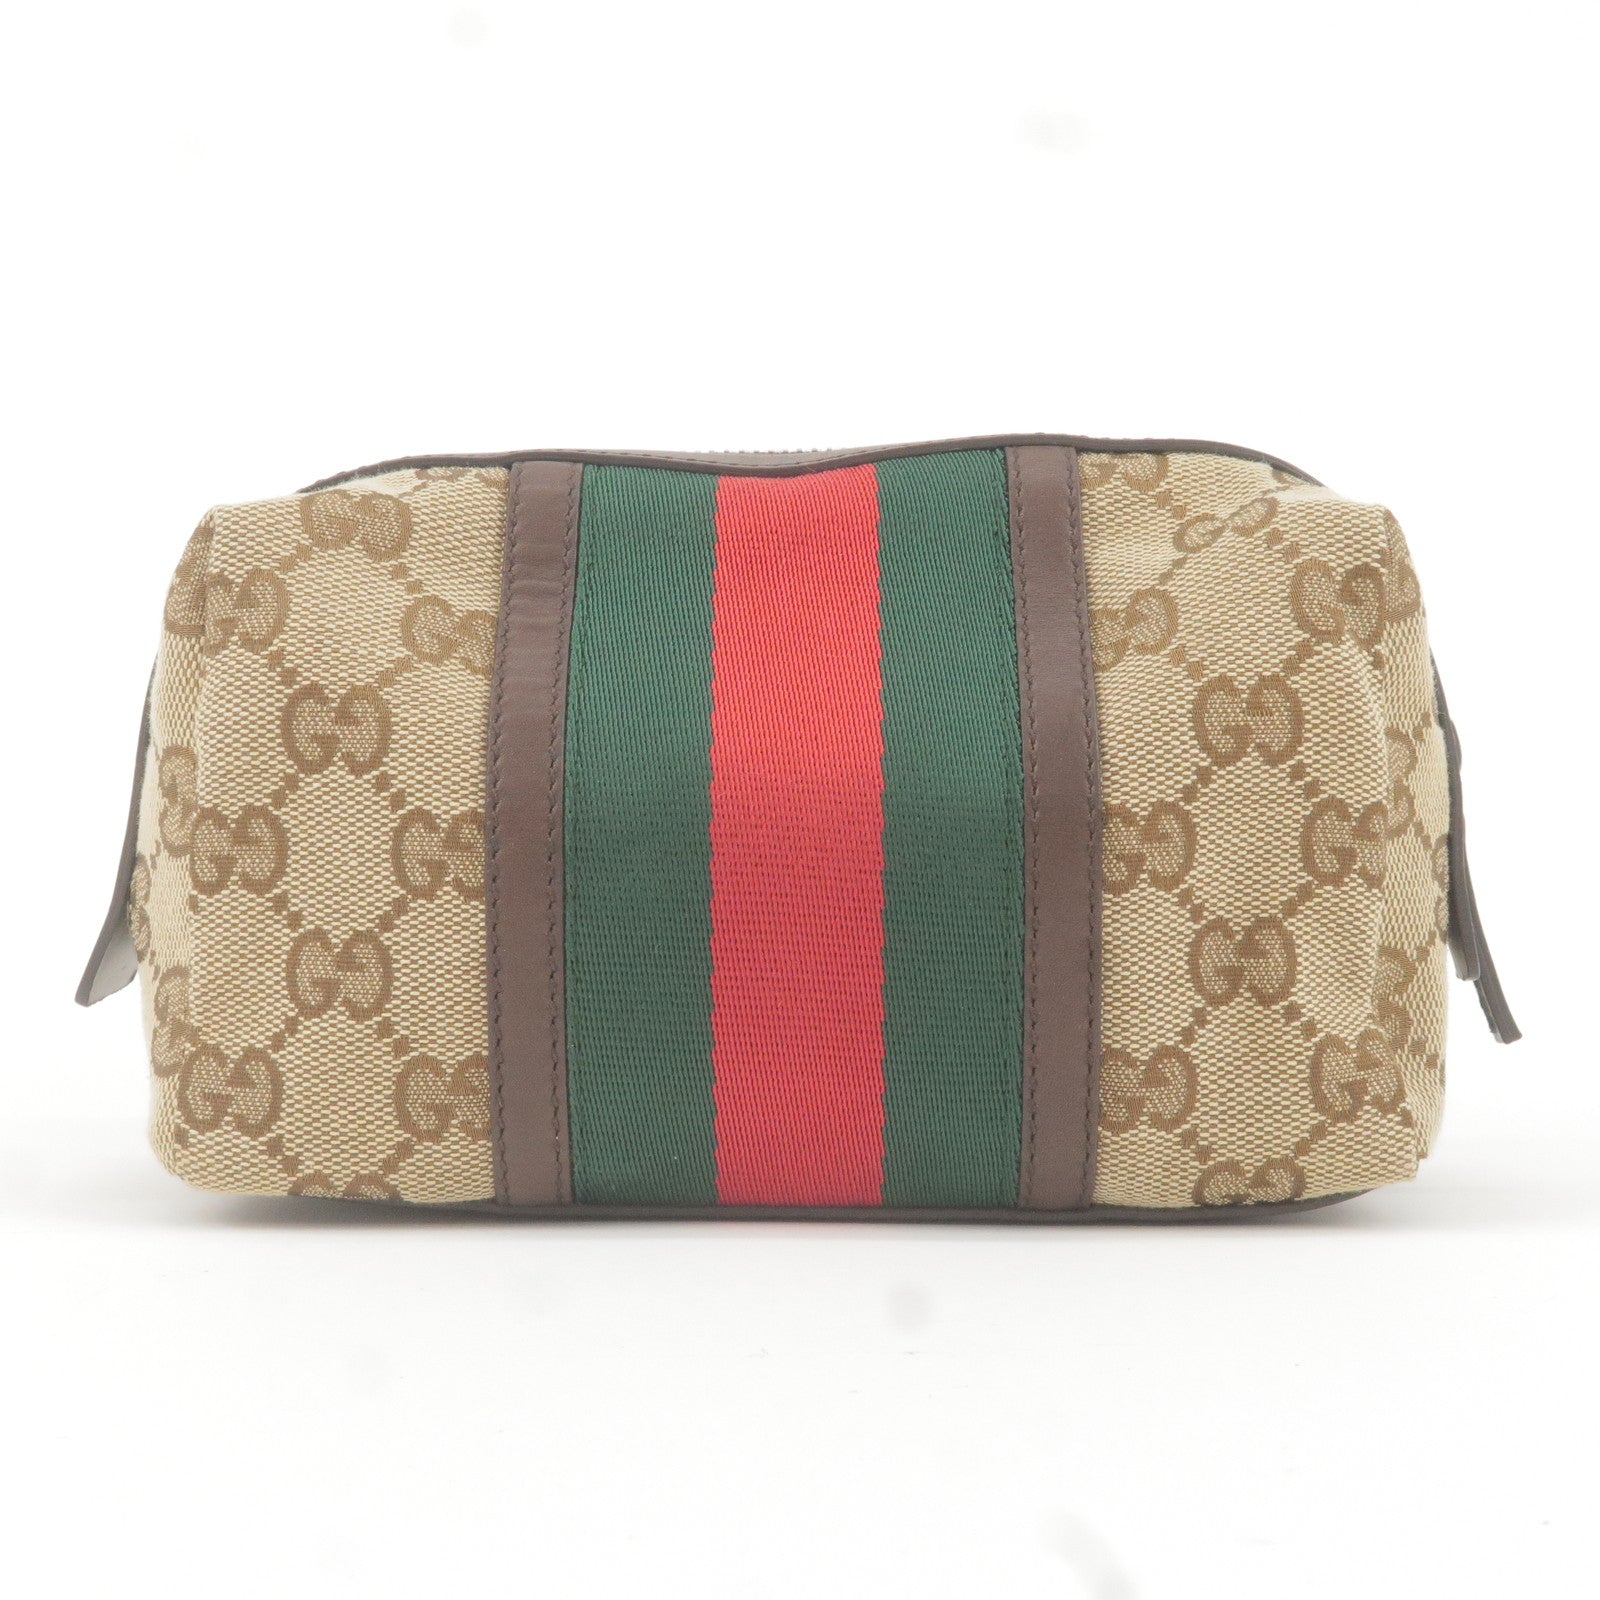 Gucci Beige/Pink GG Supreme Canvas and Leather Strawberry Print